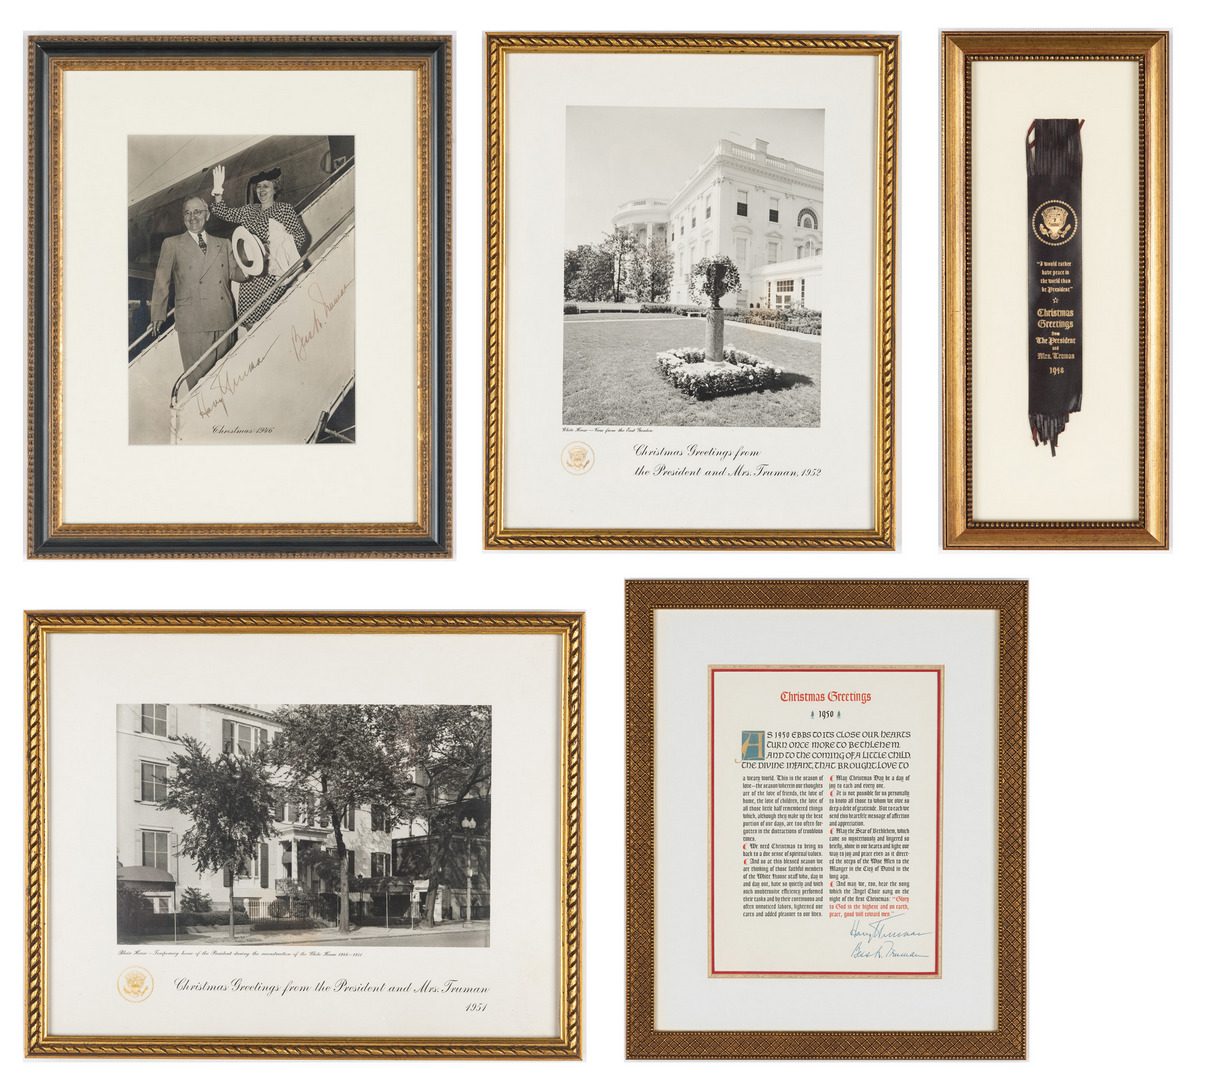 Lot 761: 5 Truman Christmas Gifts, incl. Hand Signed Photograph